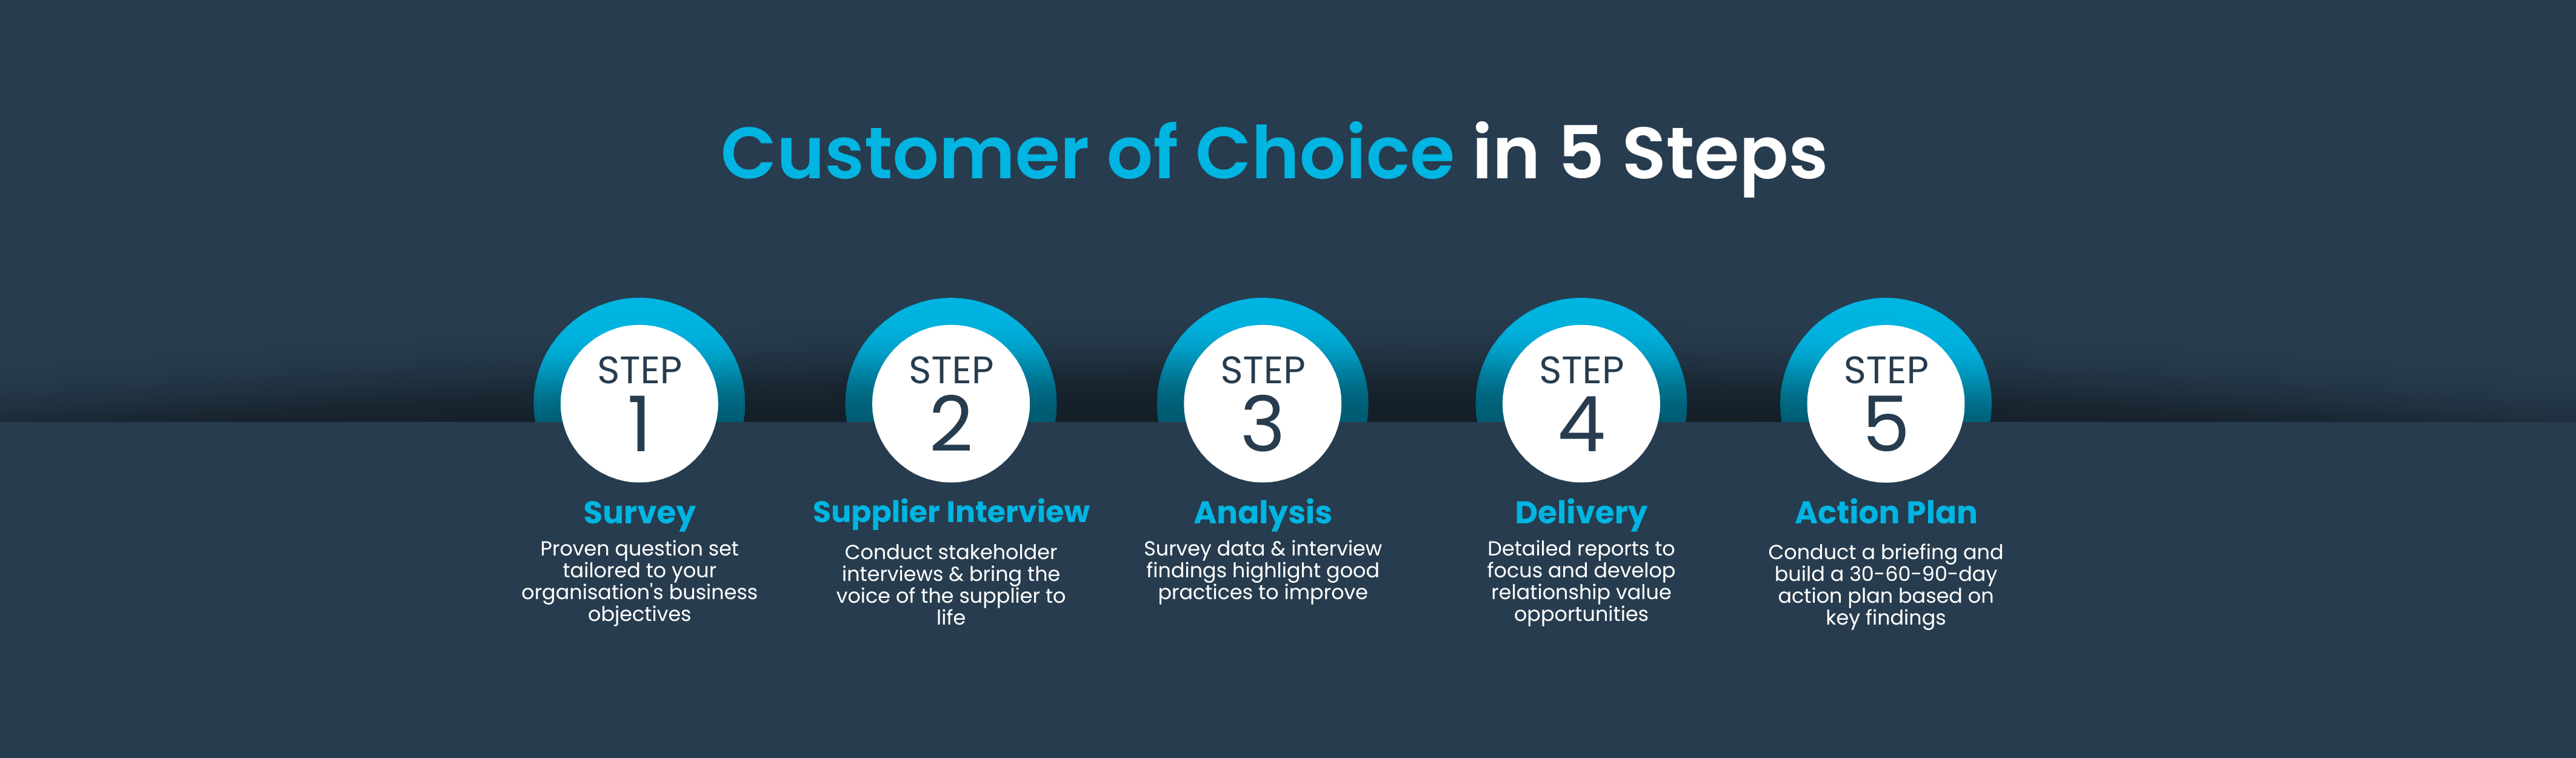 Customer of Choice in 5 Steps